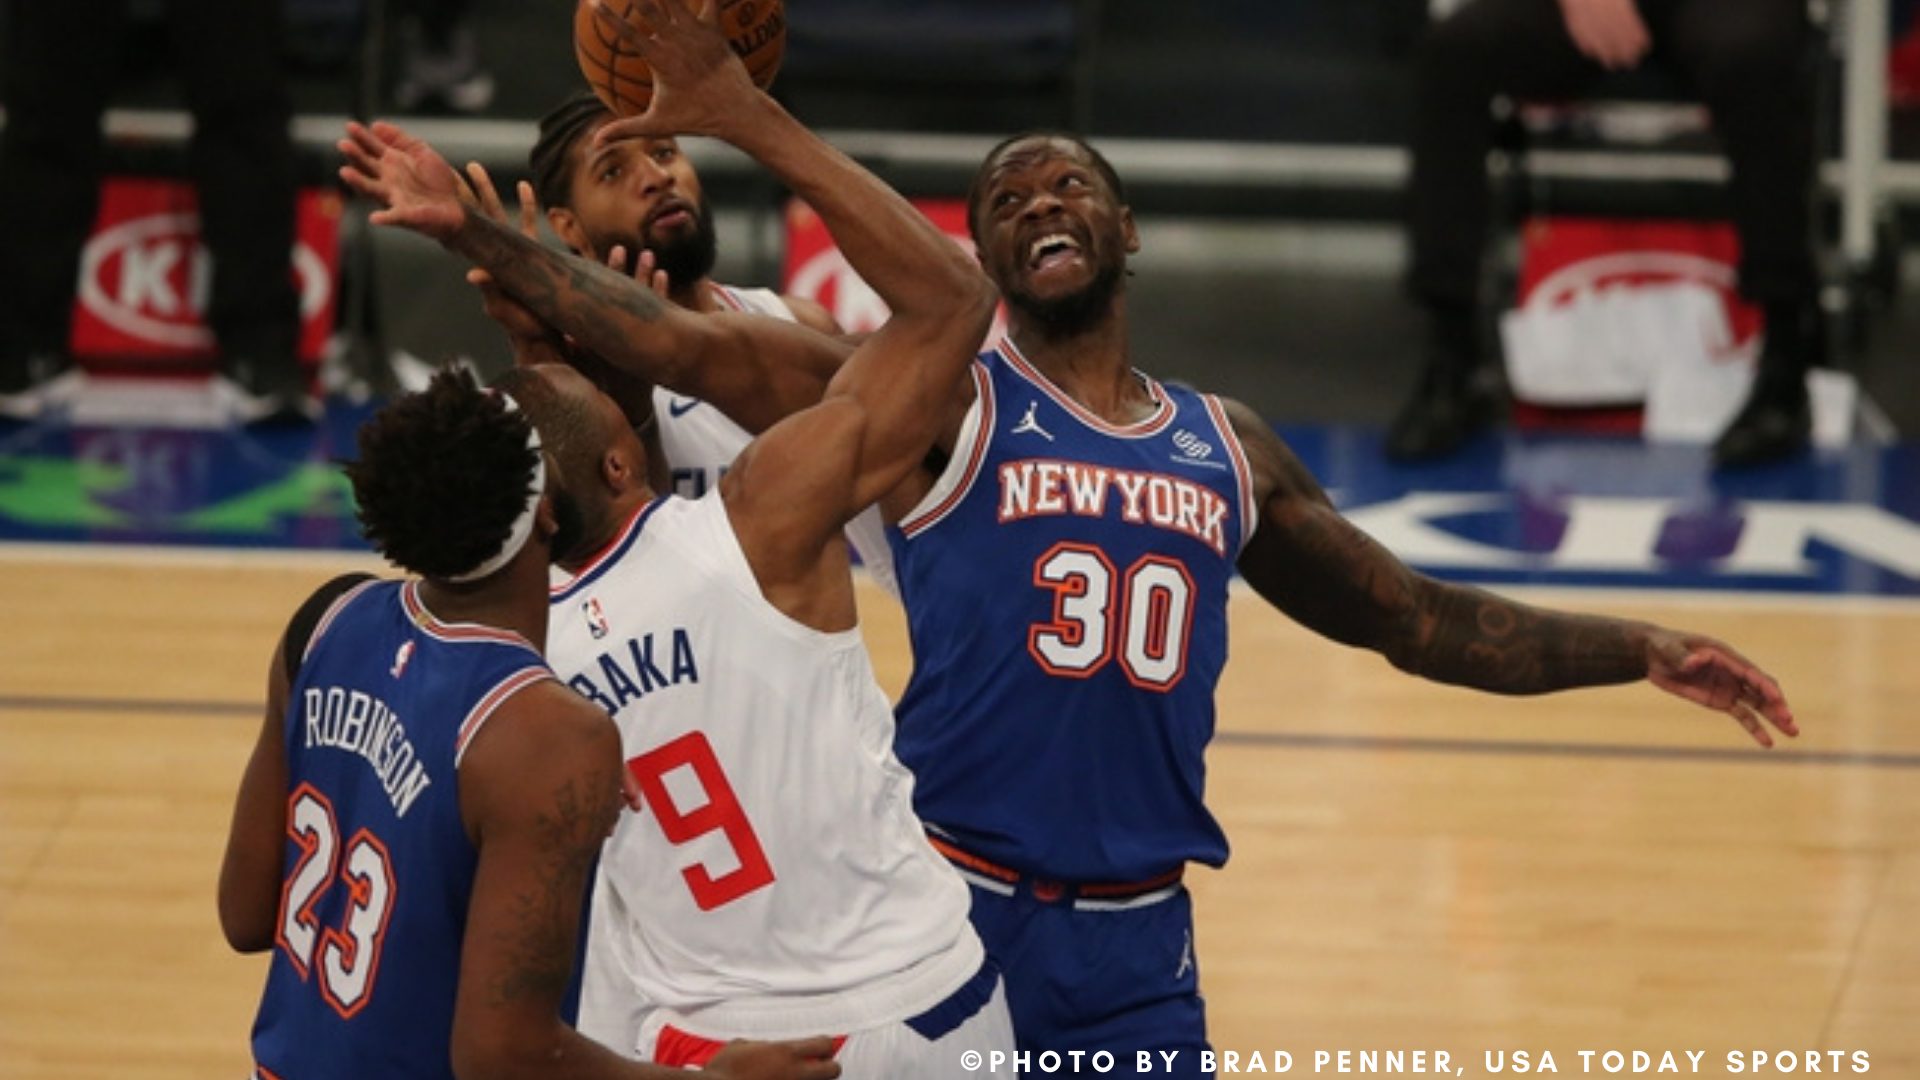 Clippers vs Knicks: Clippers lose on home court against Knicks, 106-100